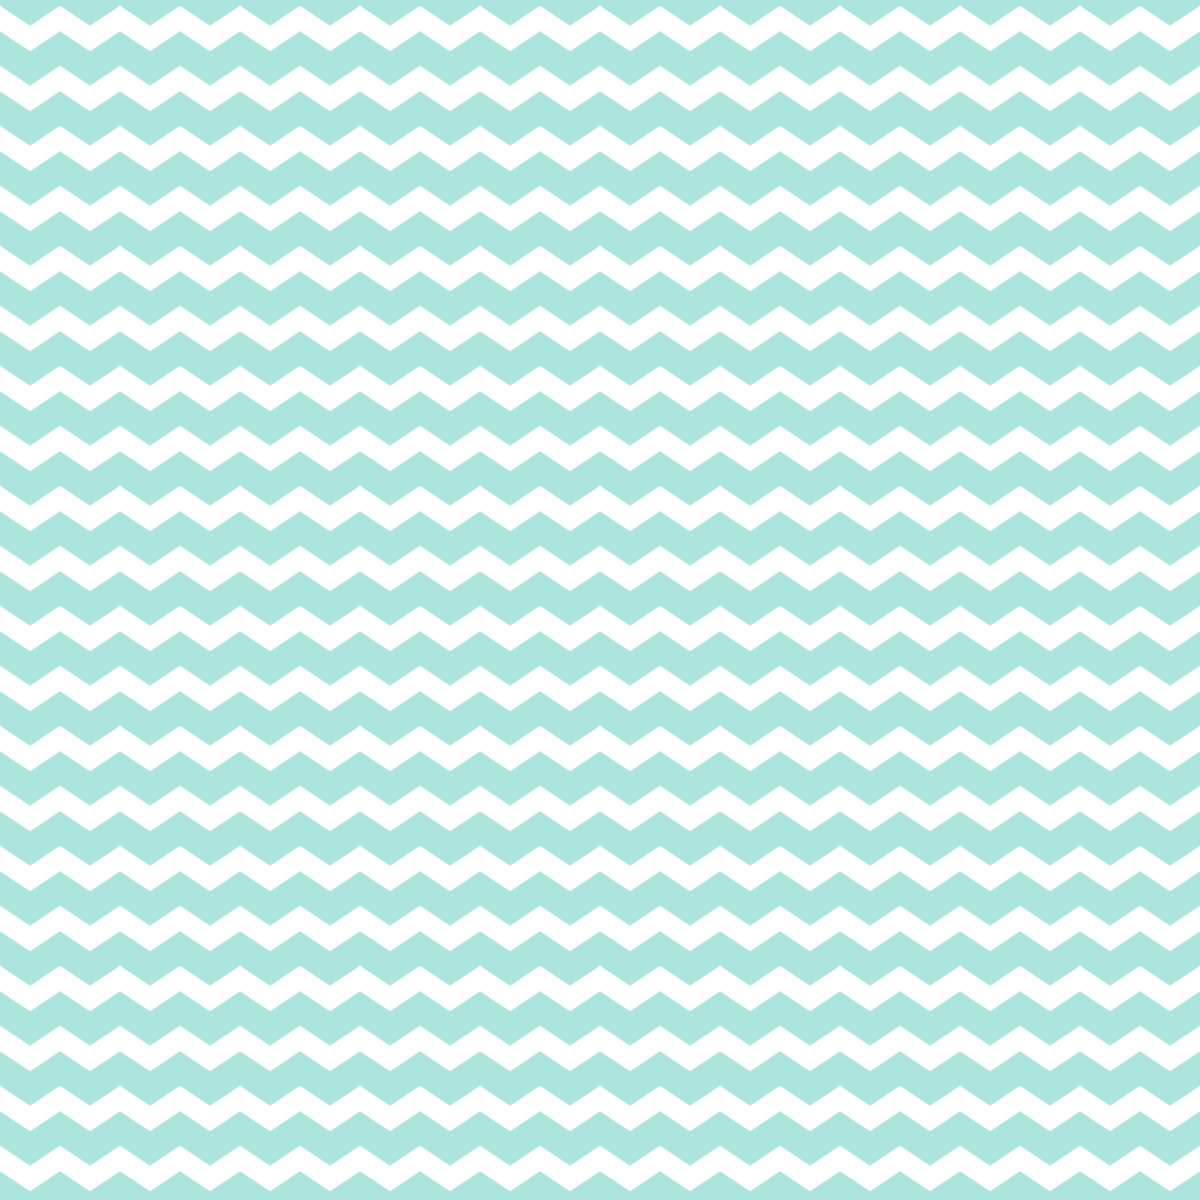 Free Digital Chevron Scrapbooking Papers - Ausdruckbares - Free Printable Backgrounds For Paper